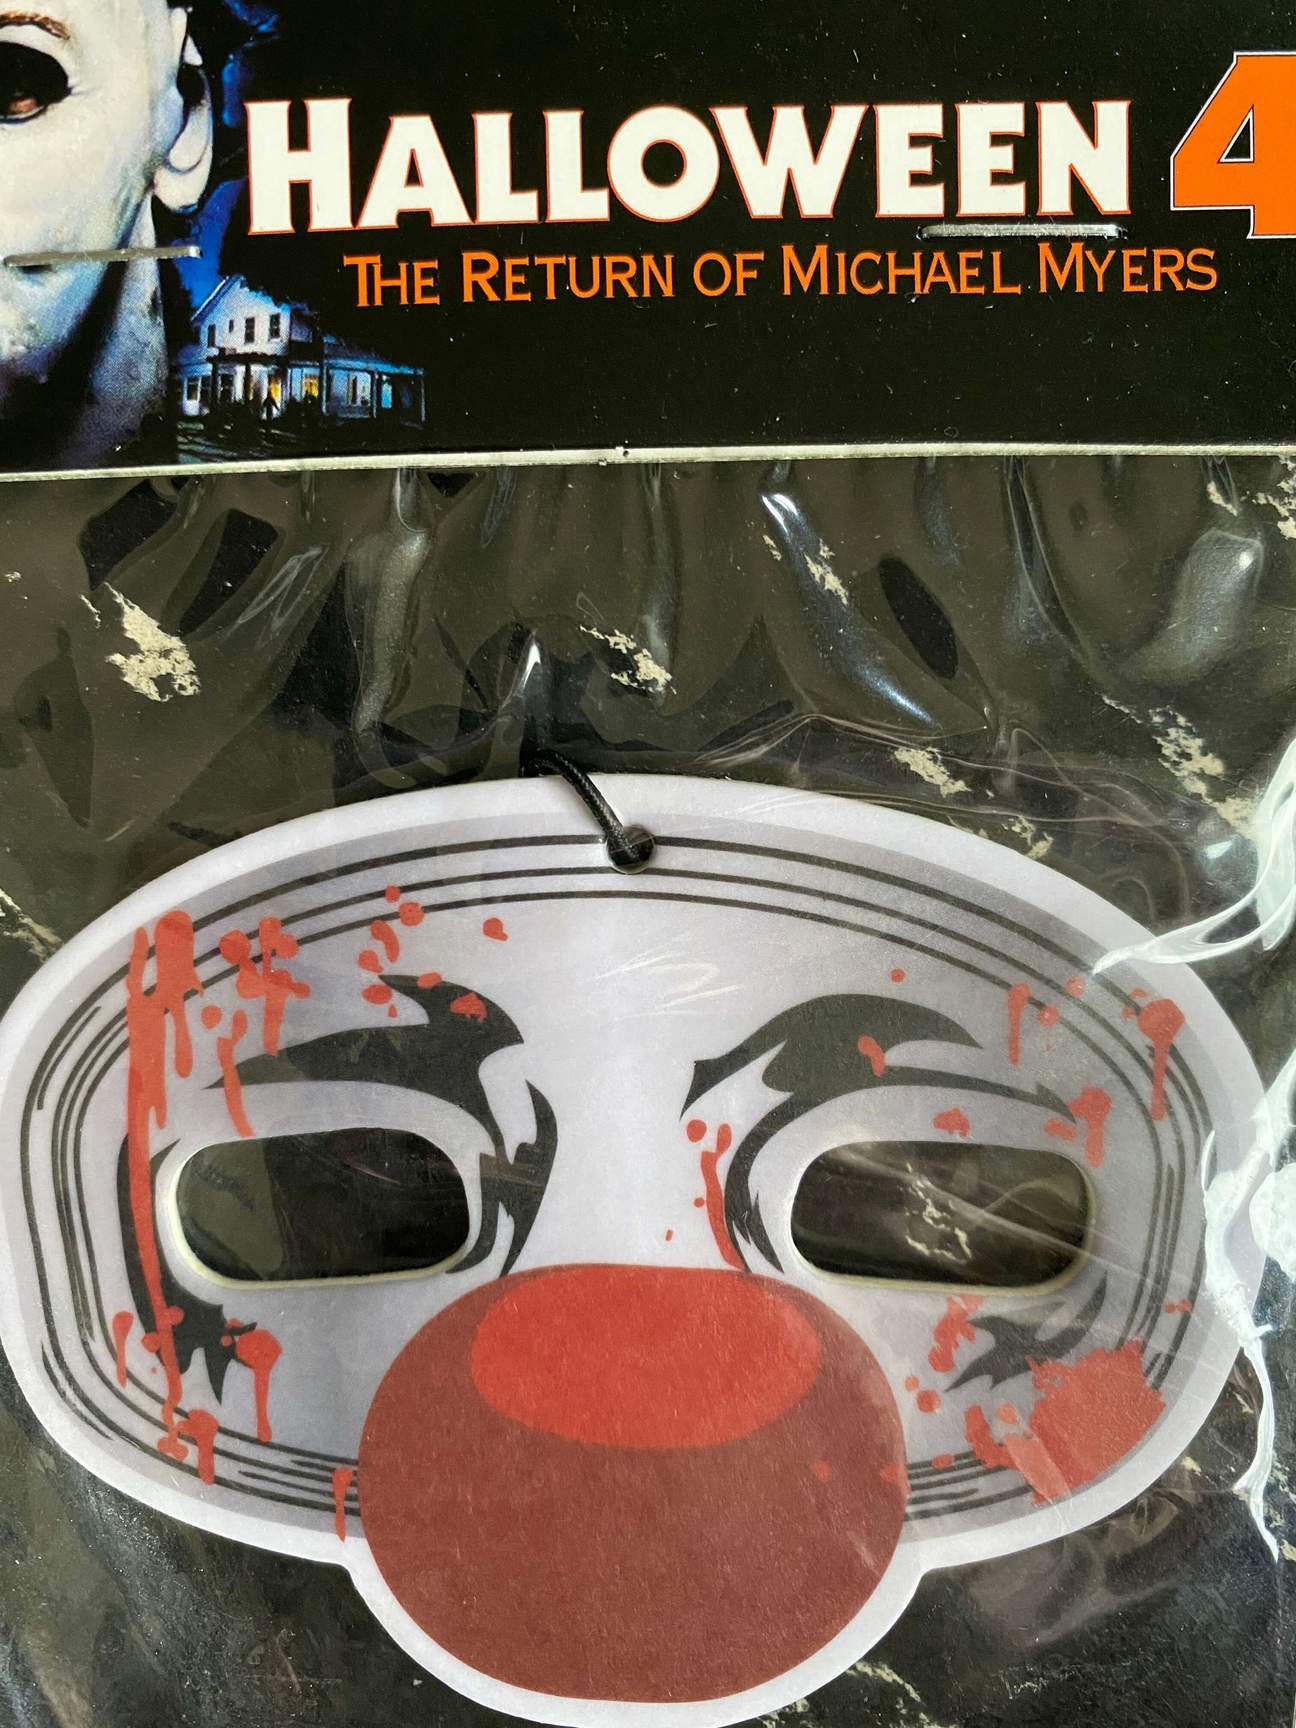 This is a Halloween 4 Return of Michael Myers air freshener that is a grey and silver mask with a red ball nose.